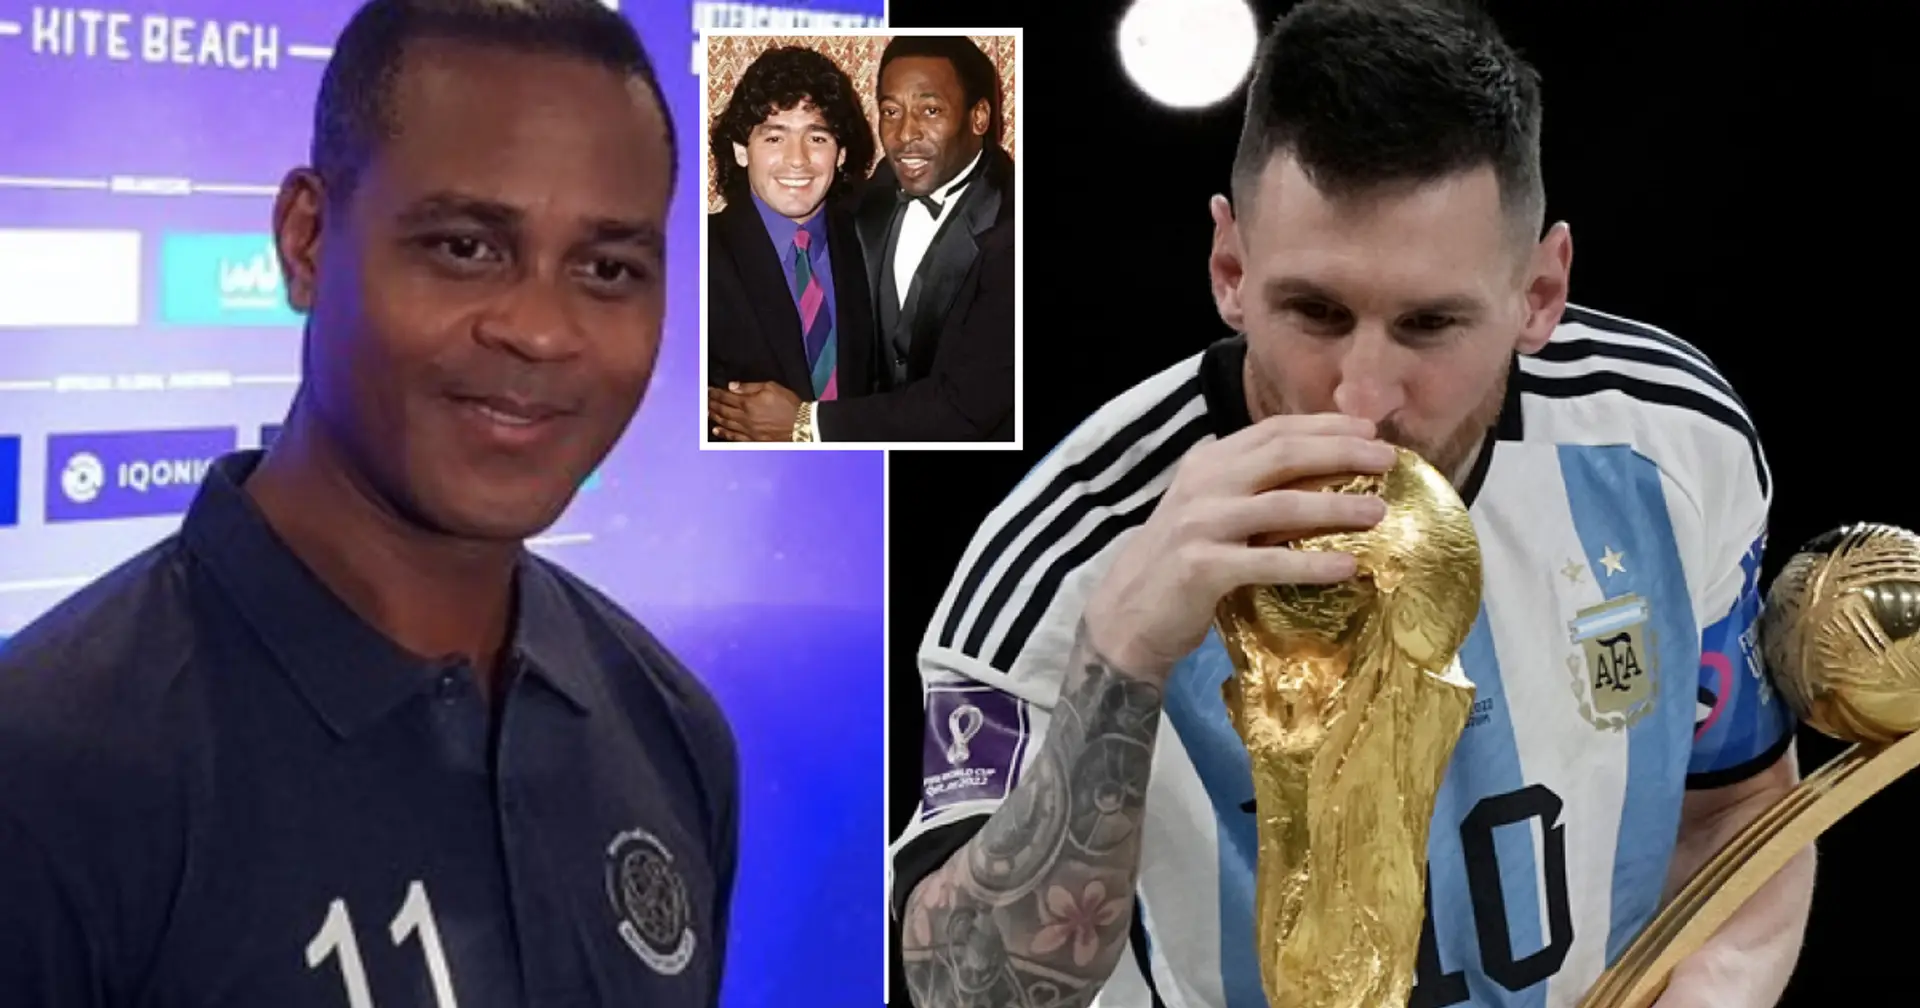 'With all due respect': Kluivert explains why he rates Messi above Pele, Maradona and Cruyff